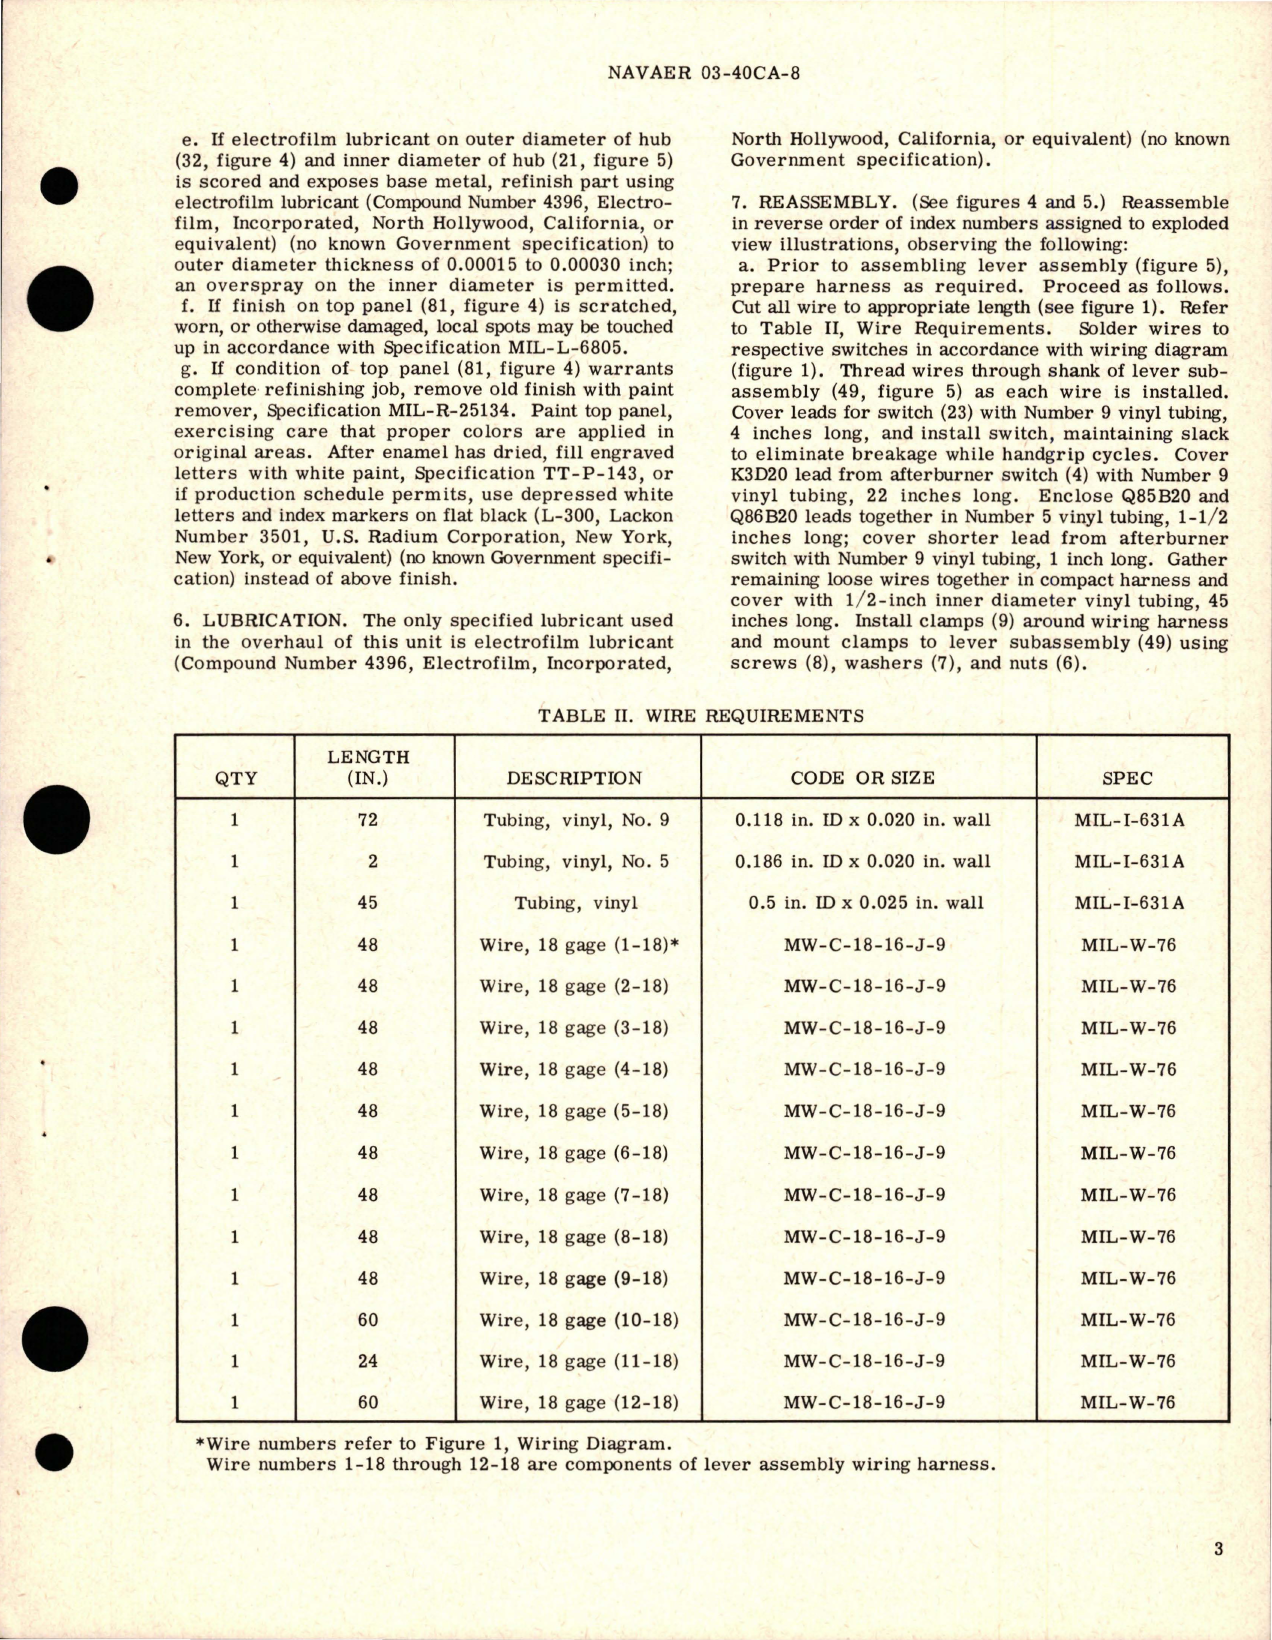 Sample page 5 from AirCorps Library document: Overhaul Instructions with Parts Breakdown for Engine Control Quadrant - Part 5L4194-3 and 5L4194-4